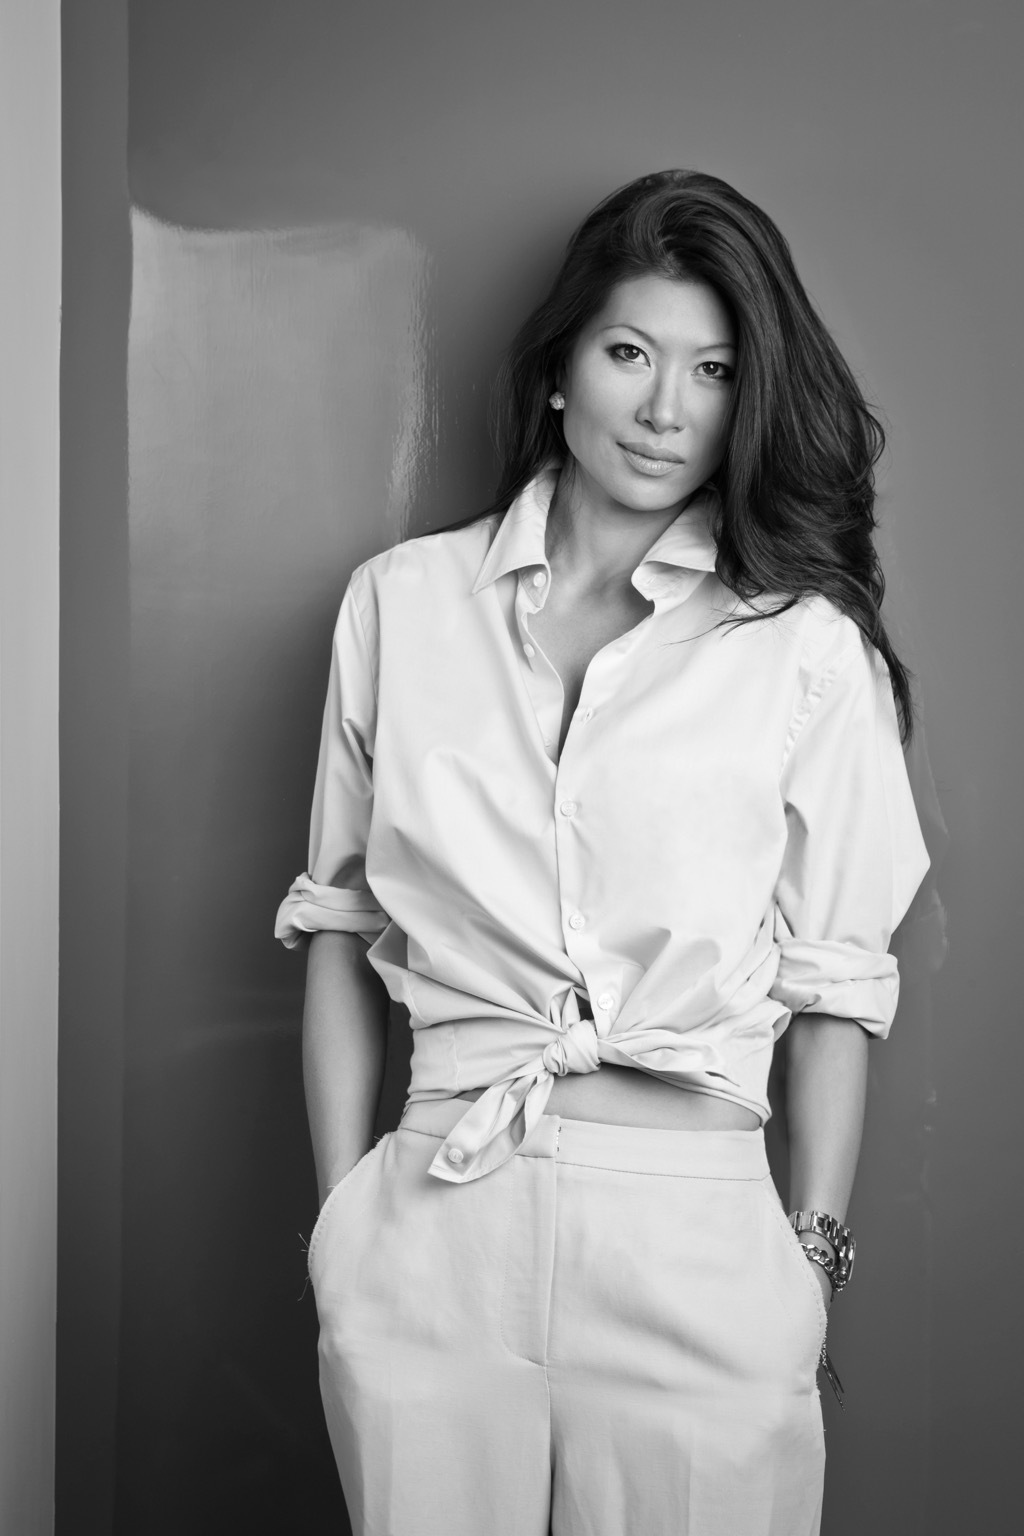 monika chiang, designer of sexiest new shoes